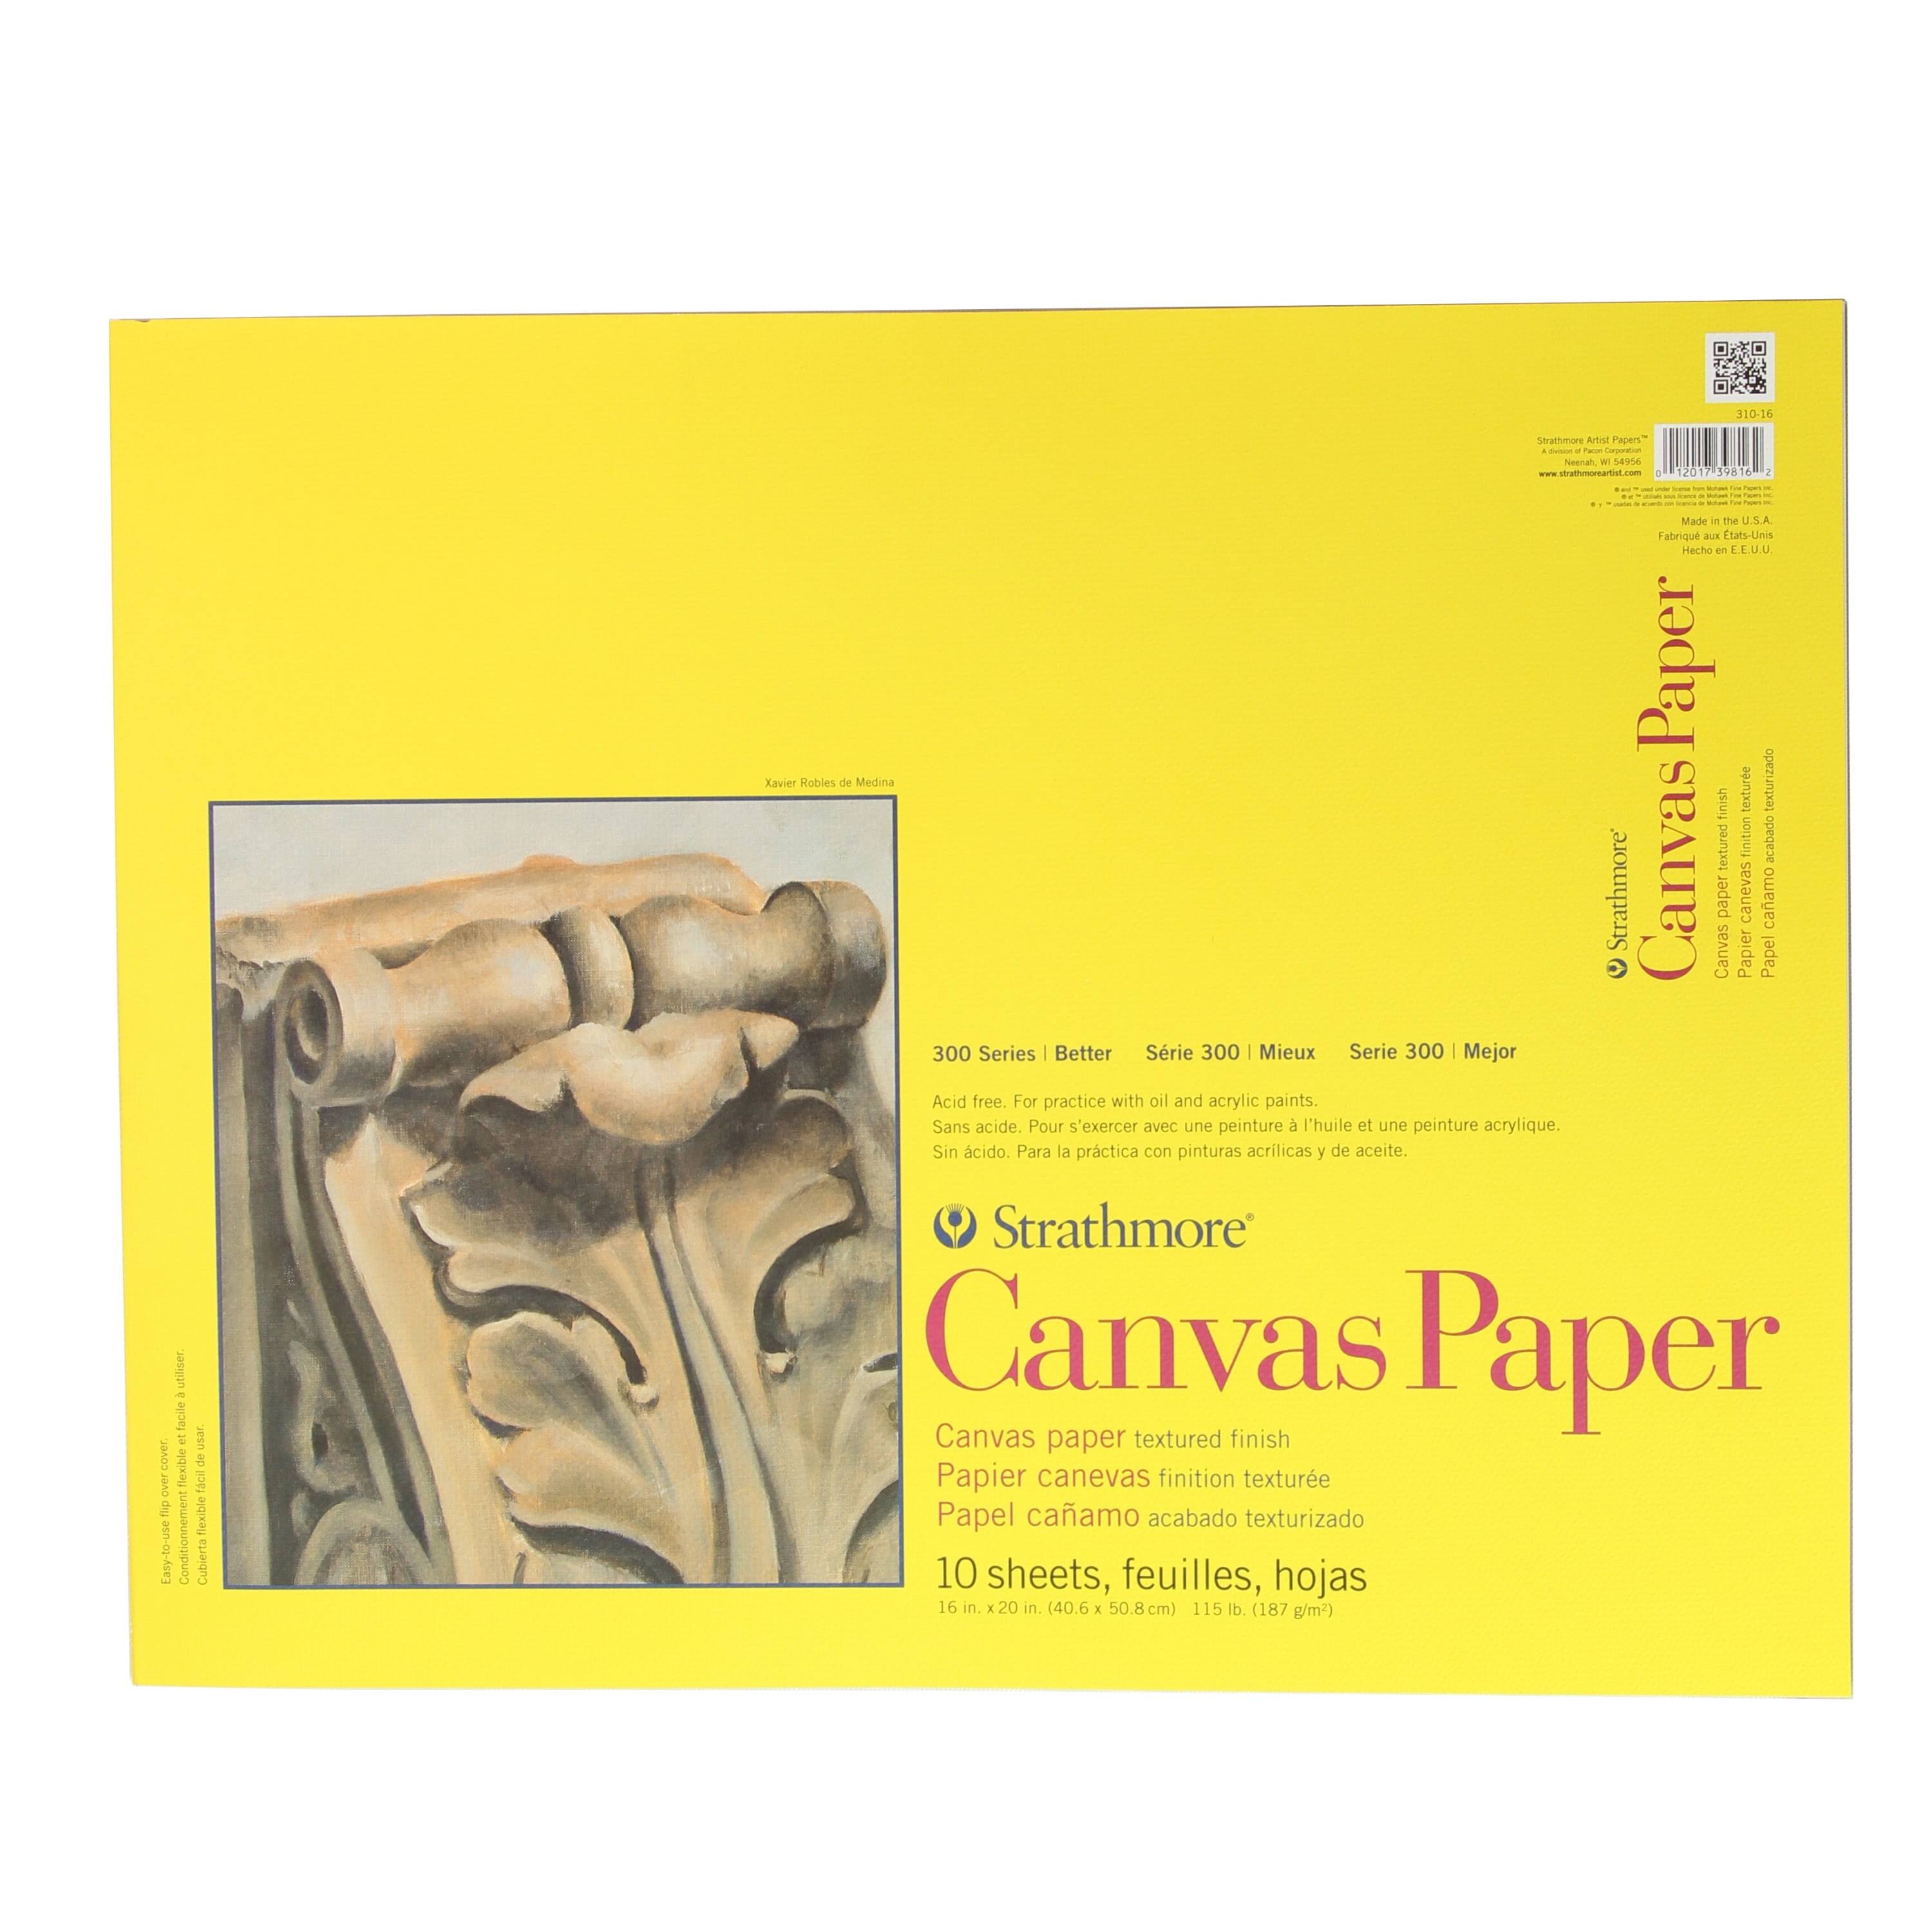 Strathmore Canvas Paper Pad - 10 Sheets